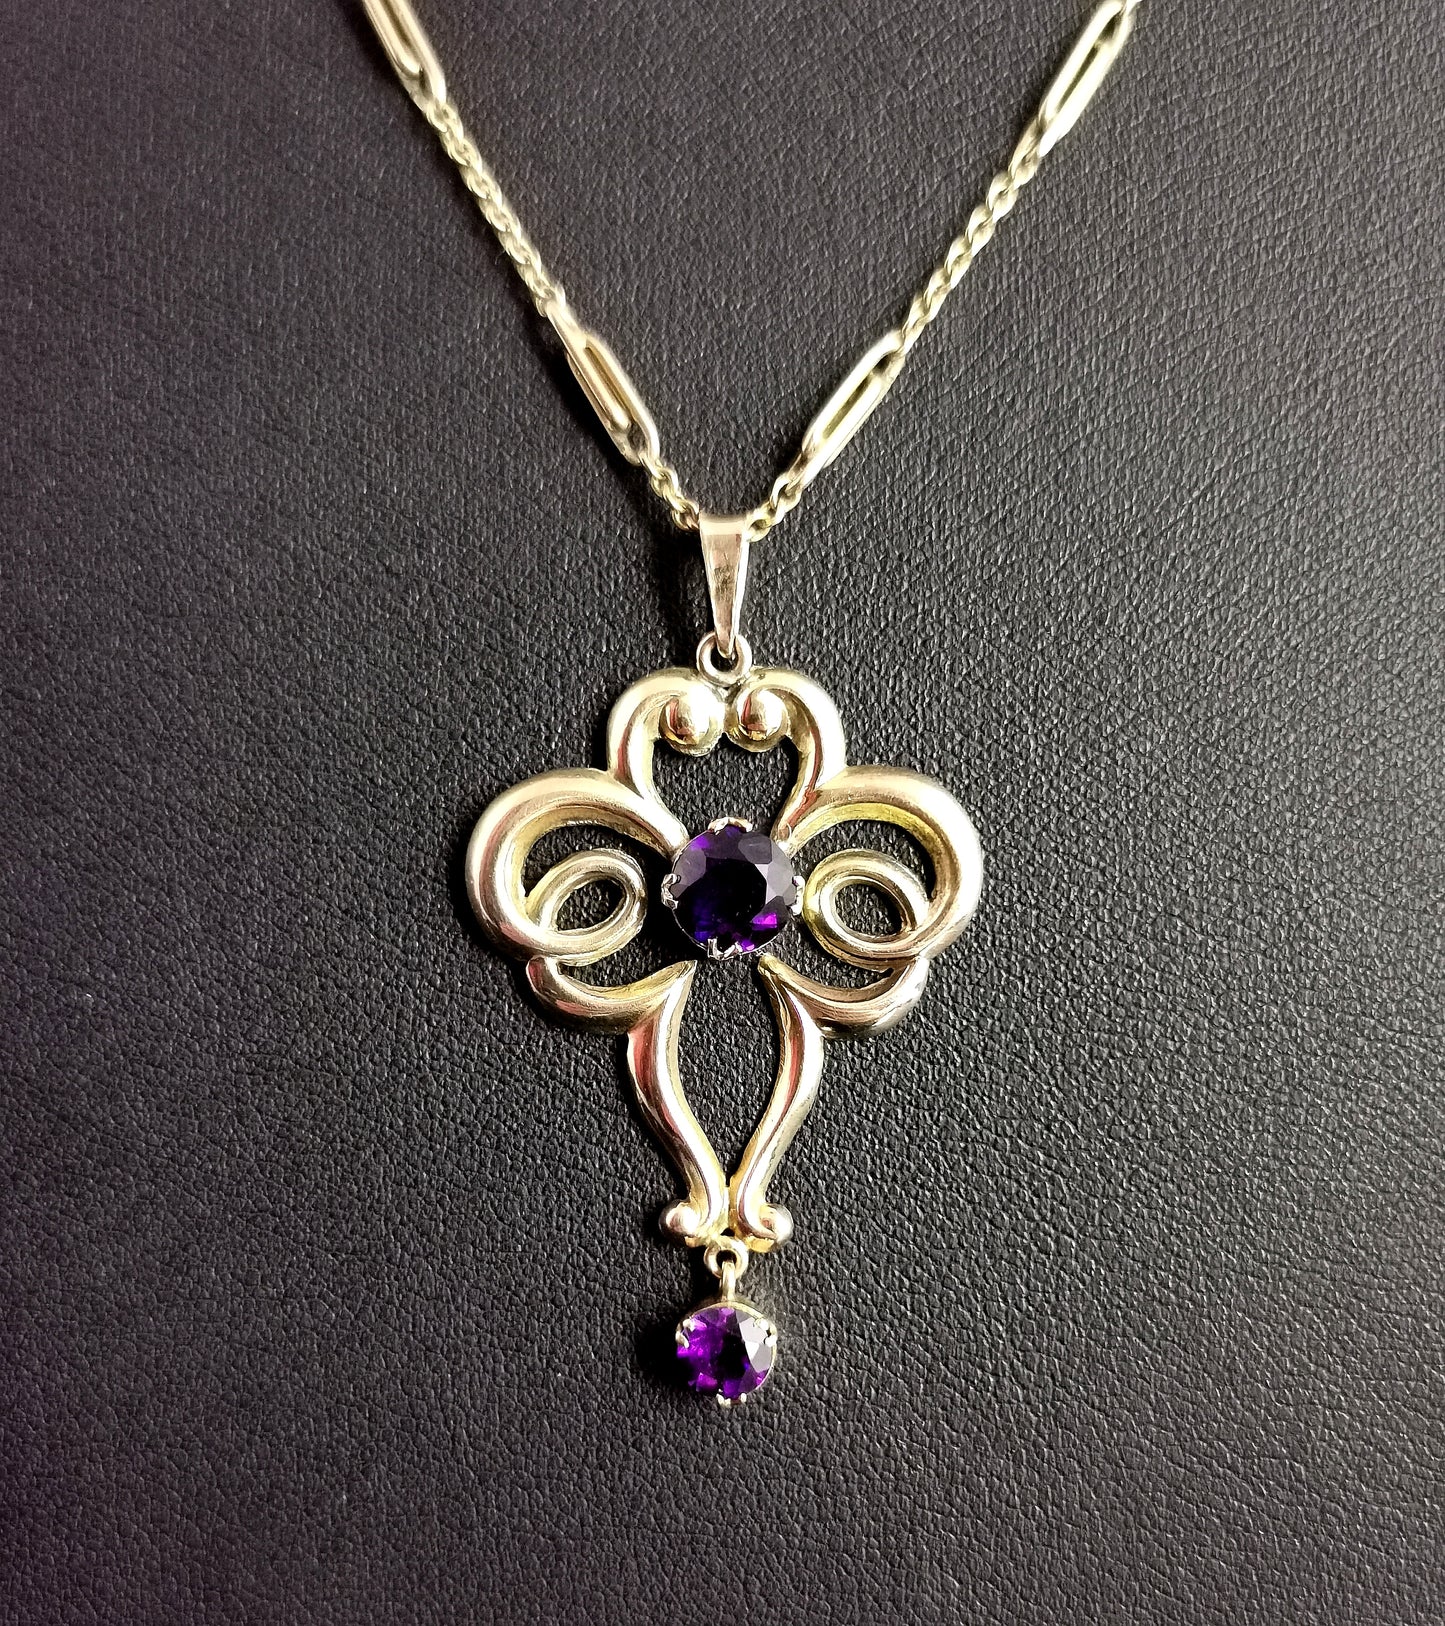 Antique Edwardian lavalier pendant, 9ct gold and Amethyst